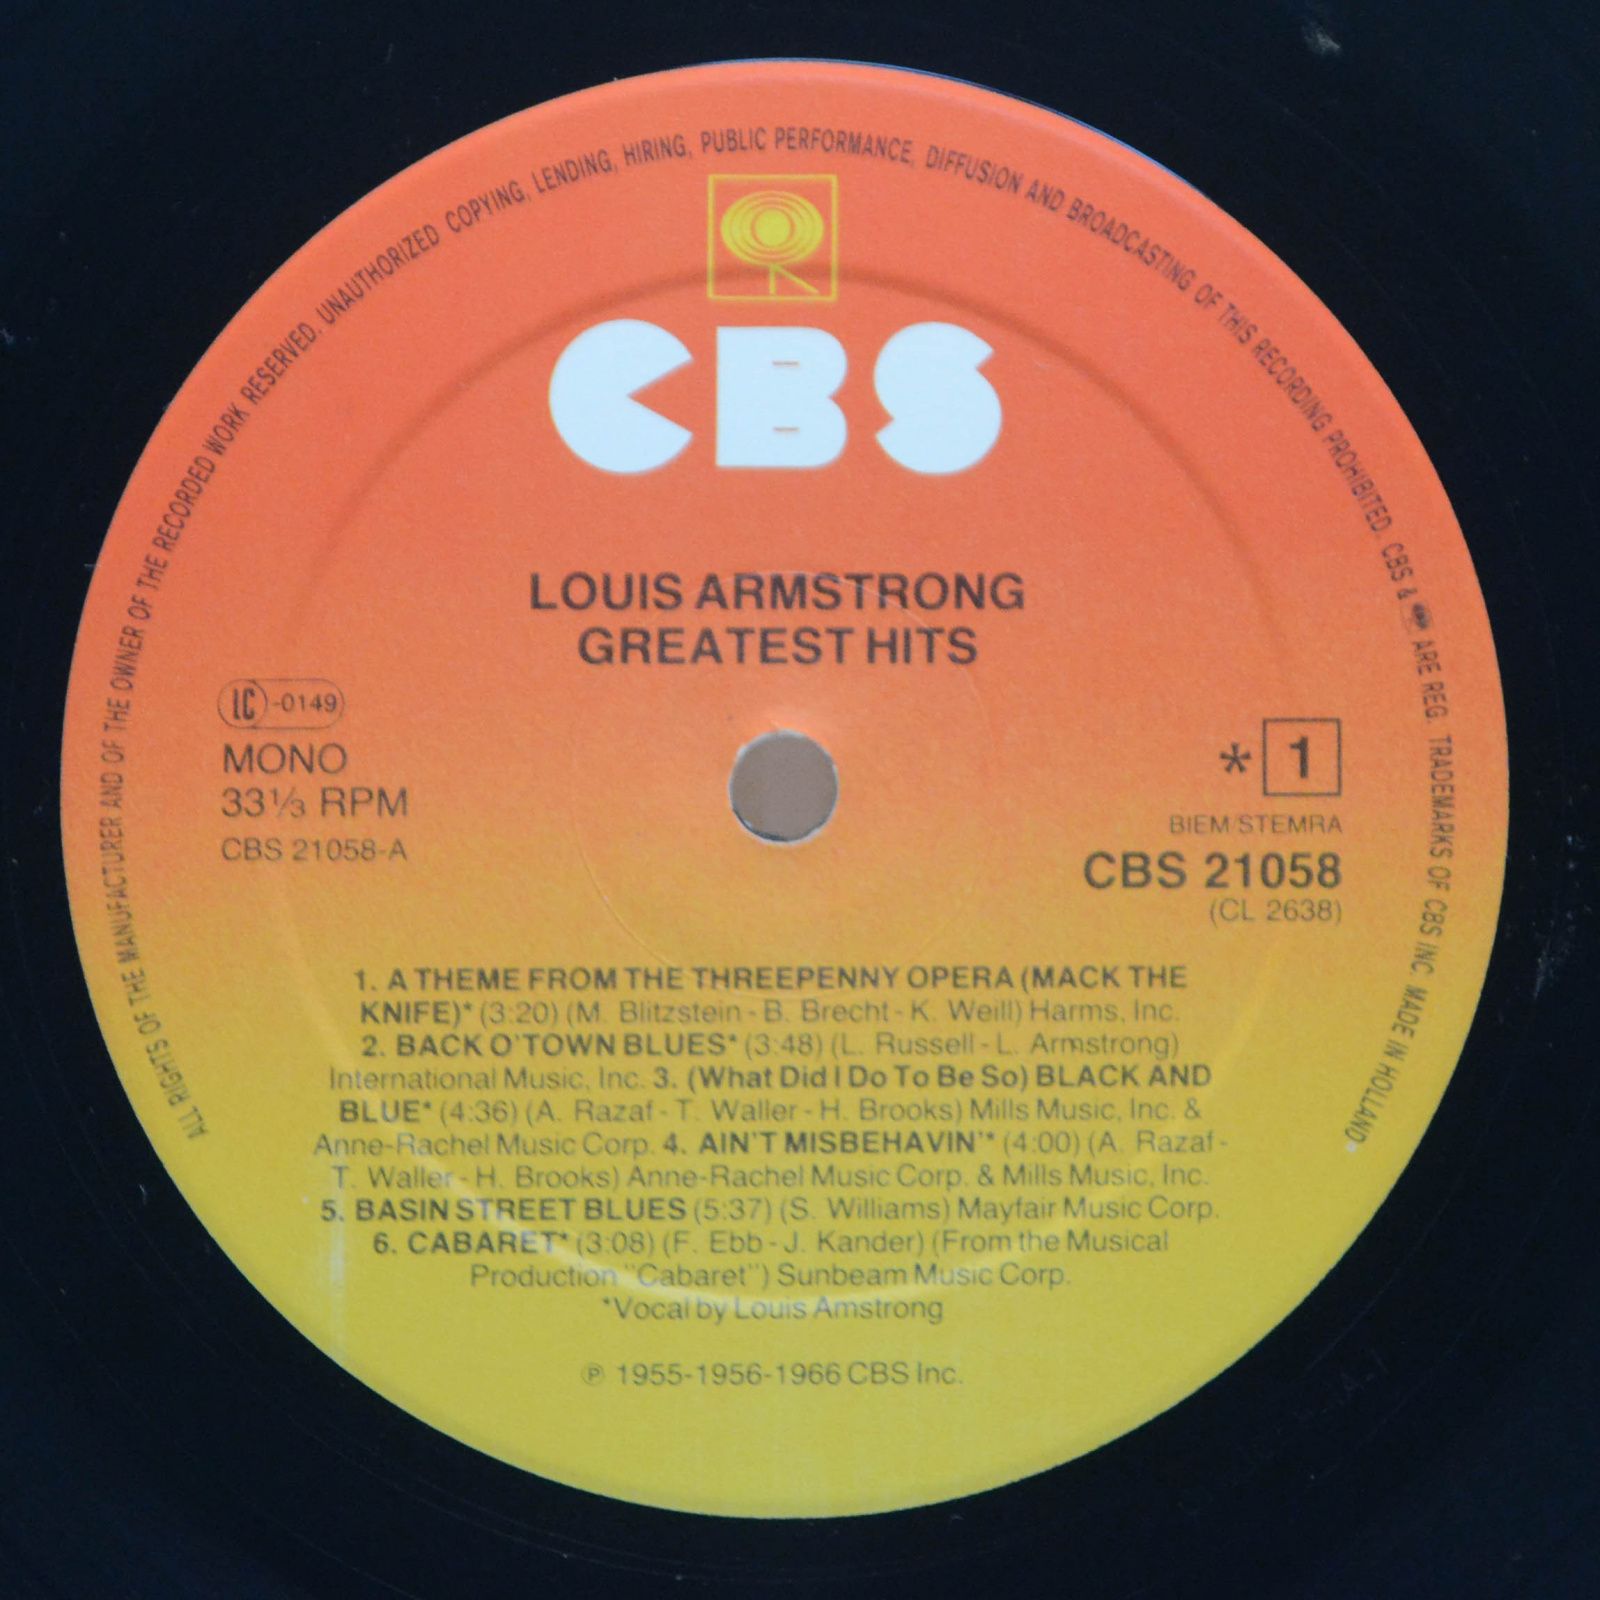 Louis Armstrong — Greatest Hits, 1967